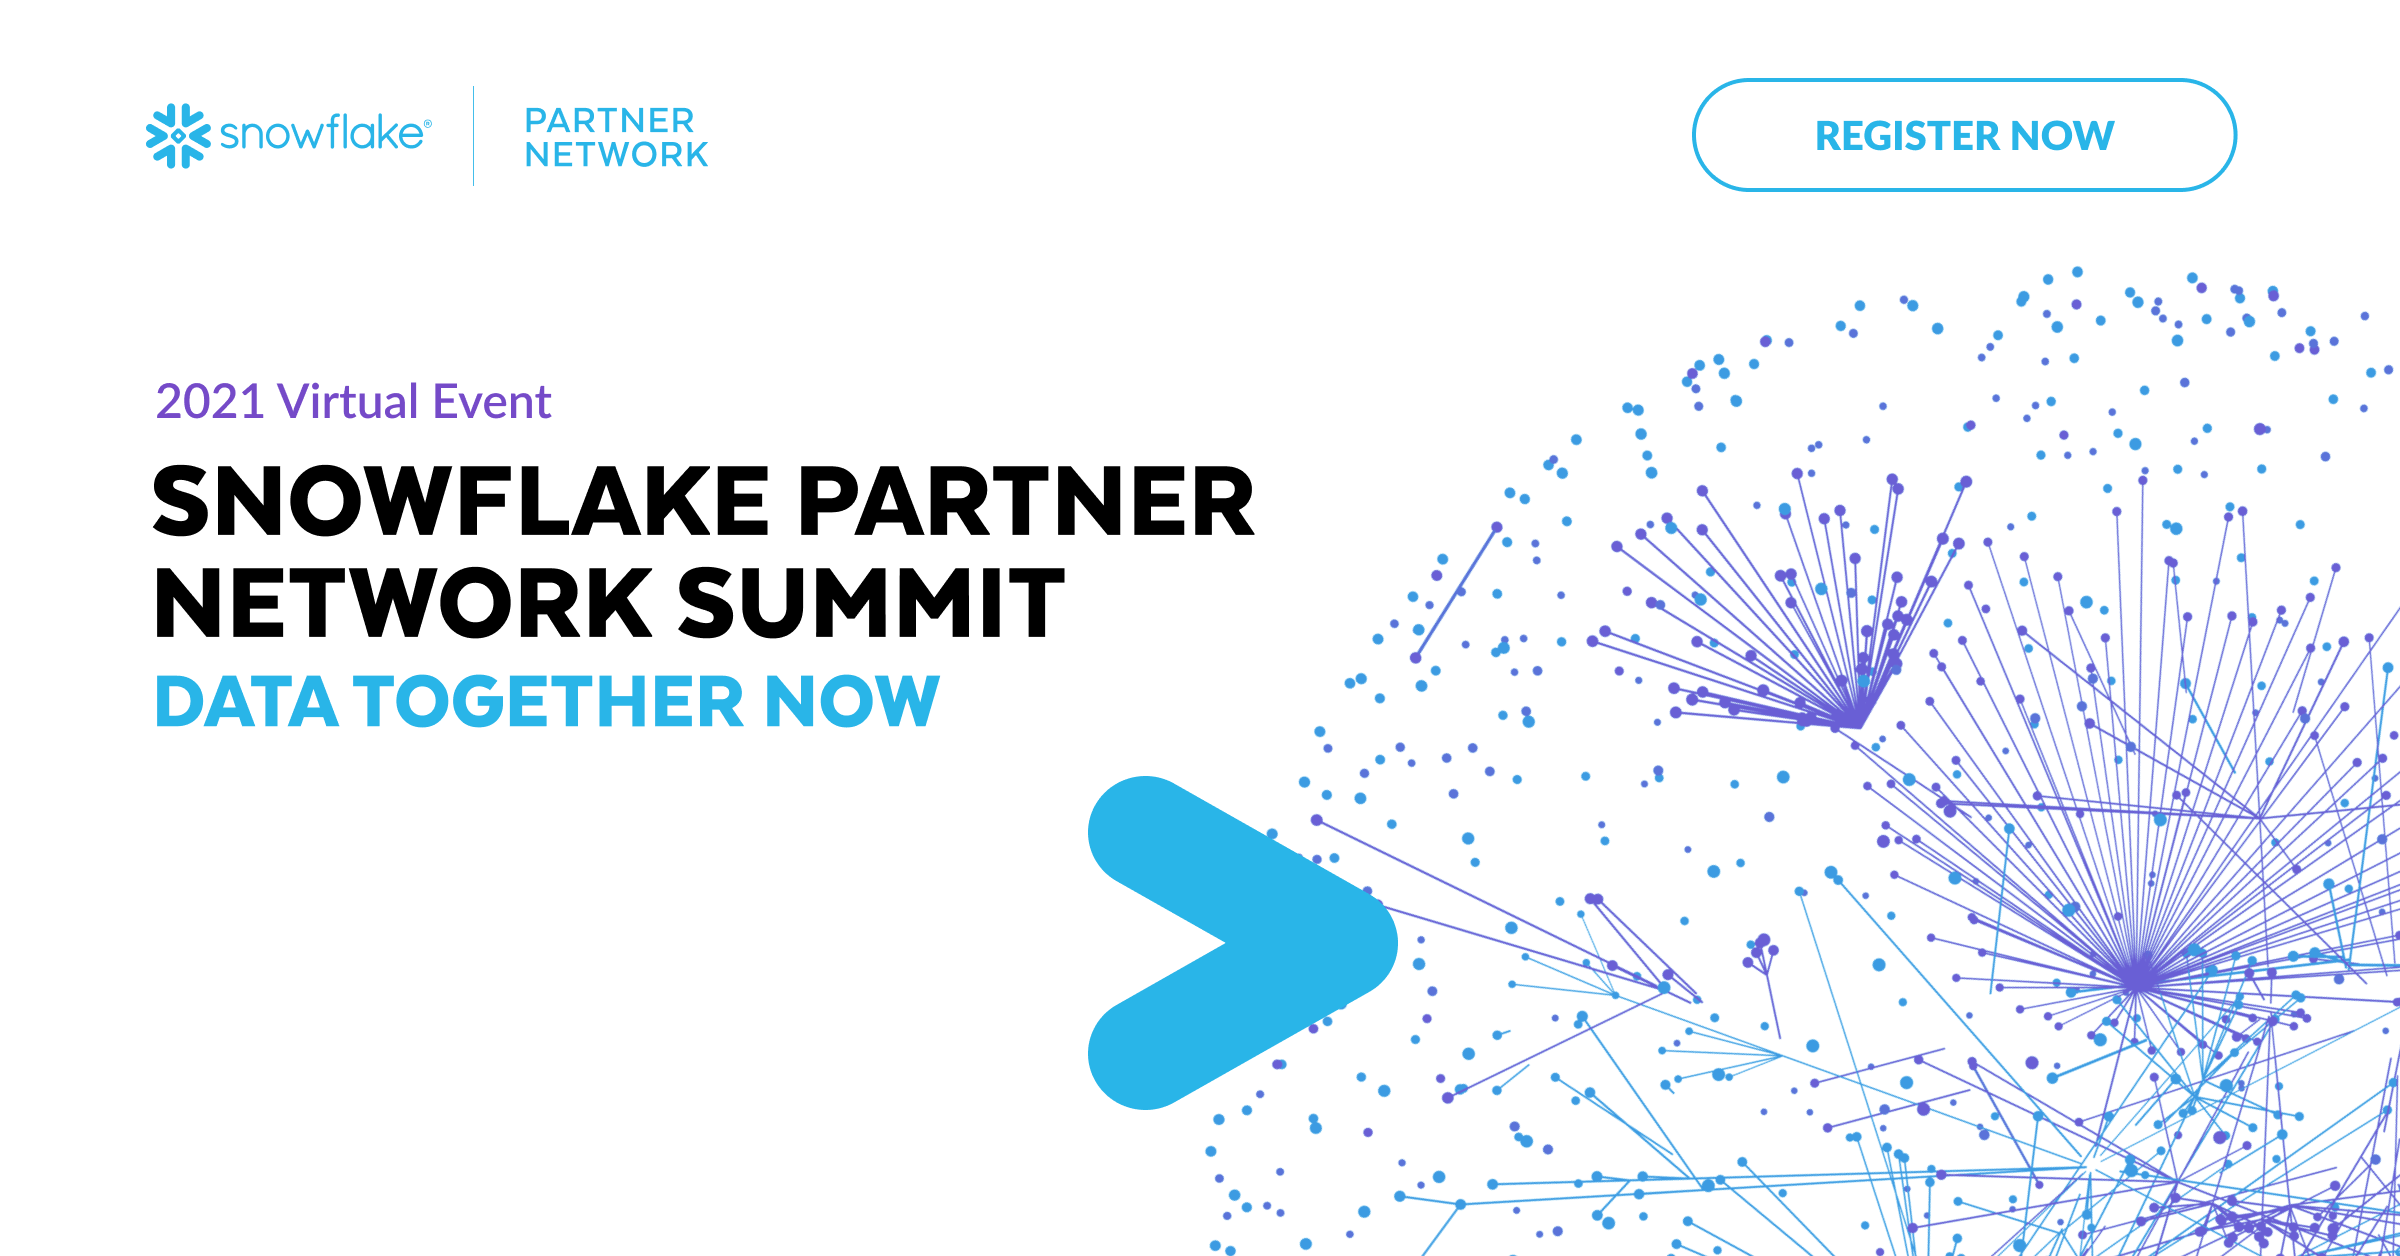 Snowflake Partner Network Summit Data Together Now